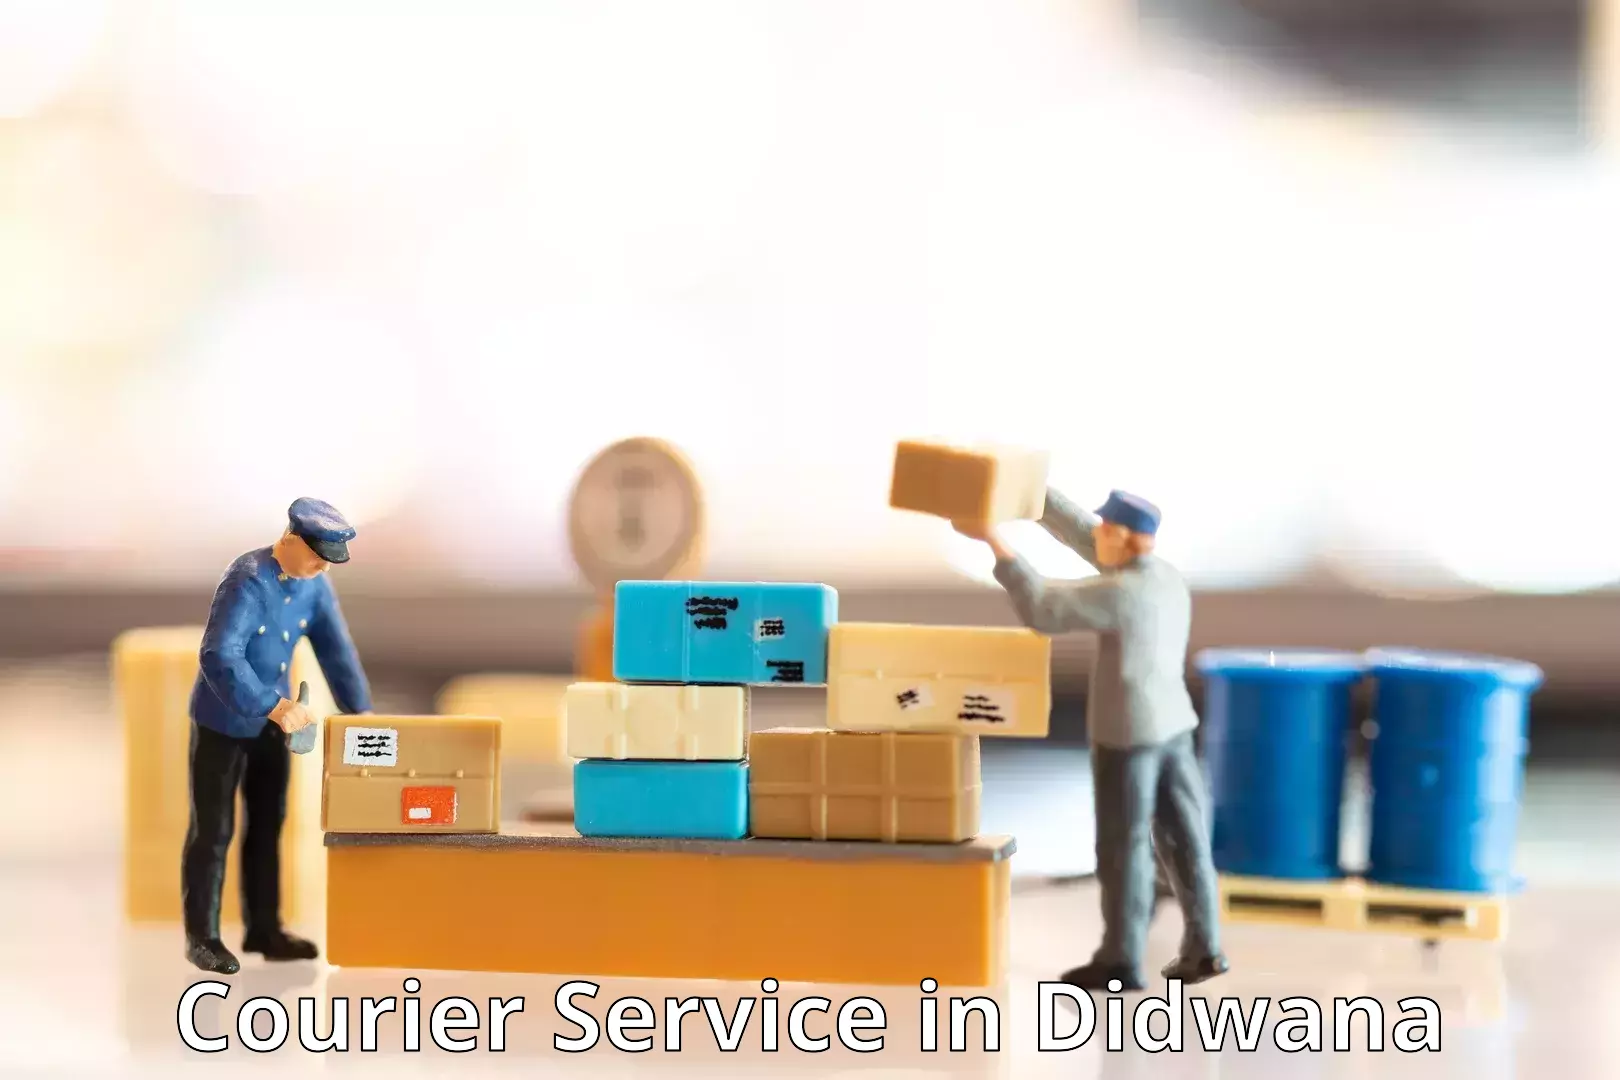 Cargo delivery service in Didwana